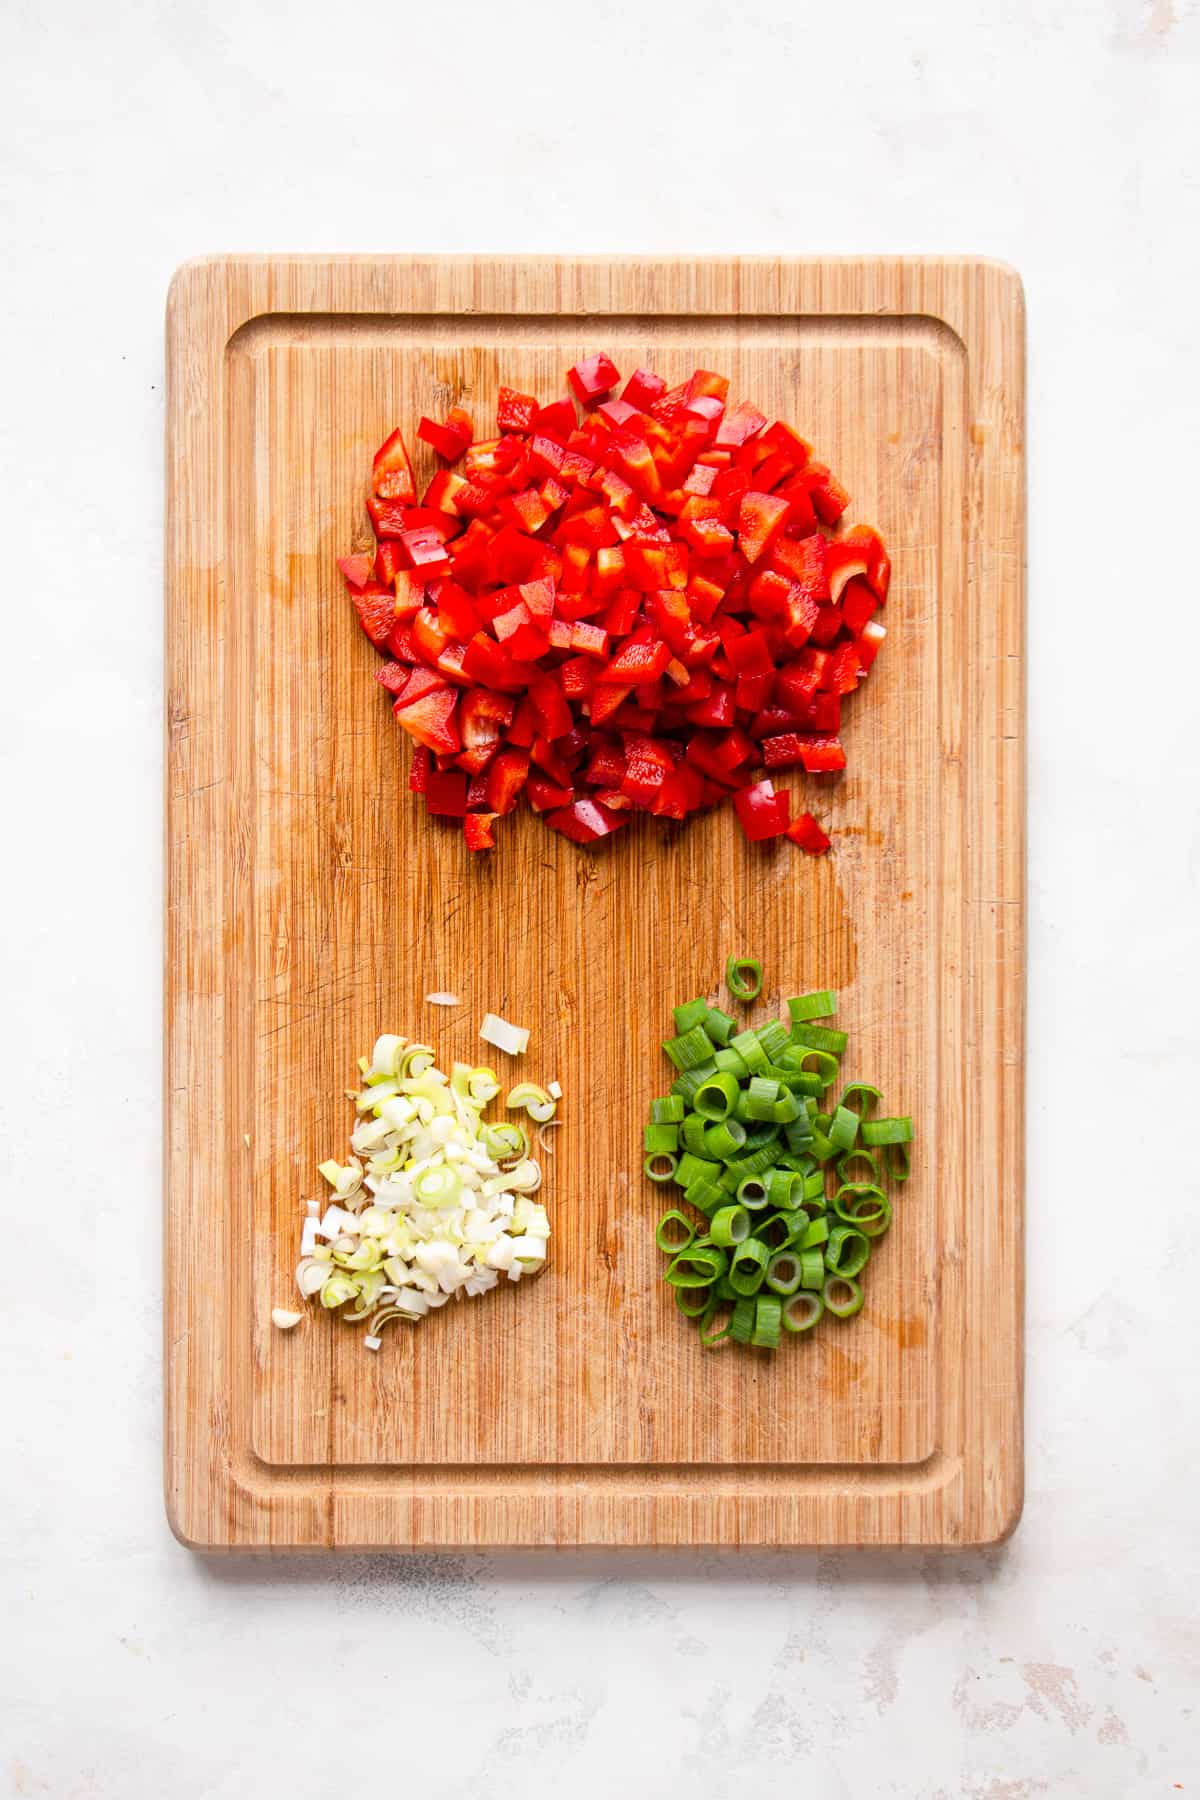 Chopped red pepper and scallions on a wooden cutting board.